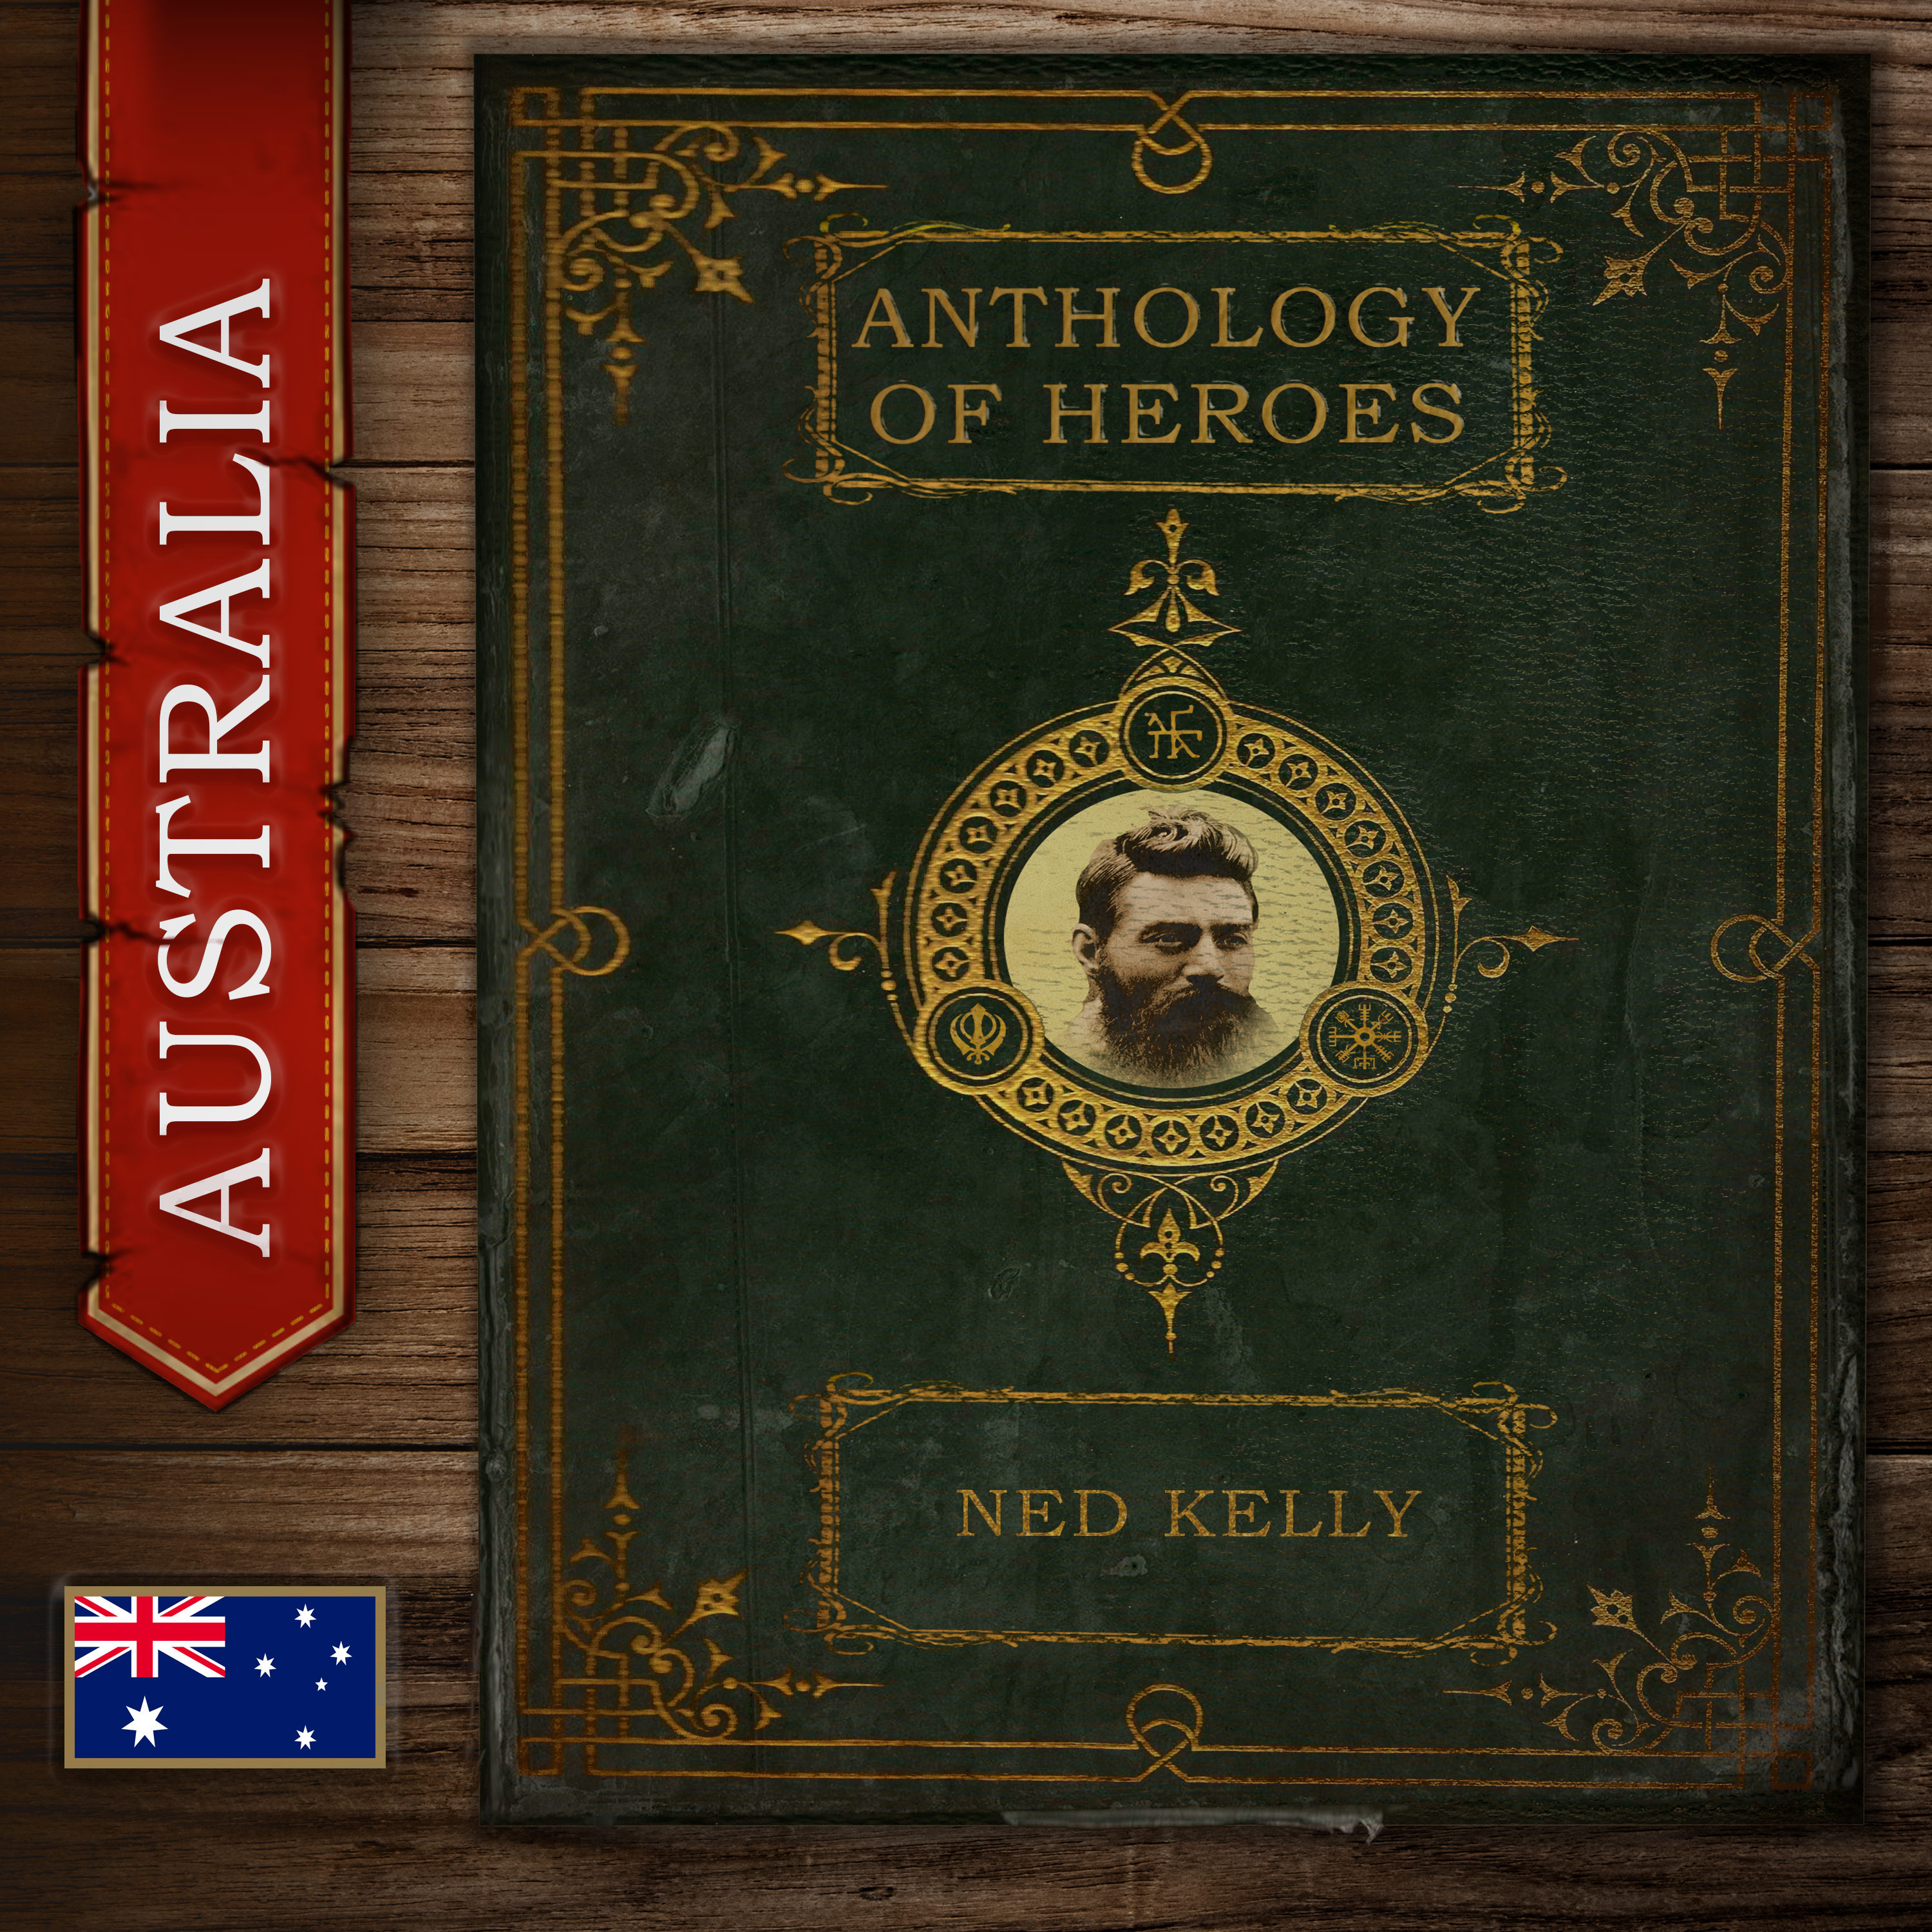 Australian Outlaw Ned Kelly and His Gang